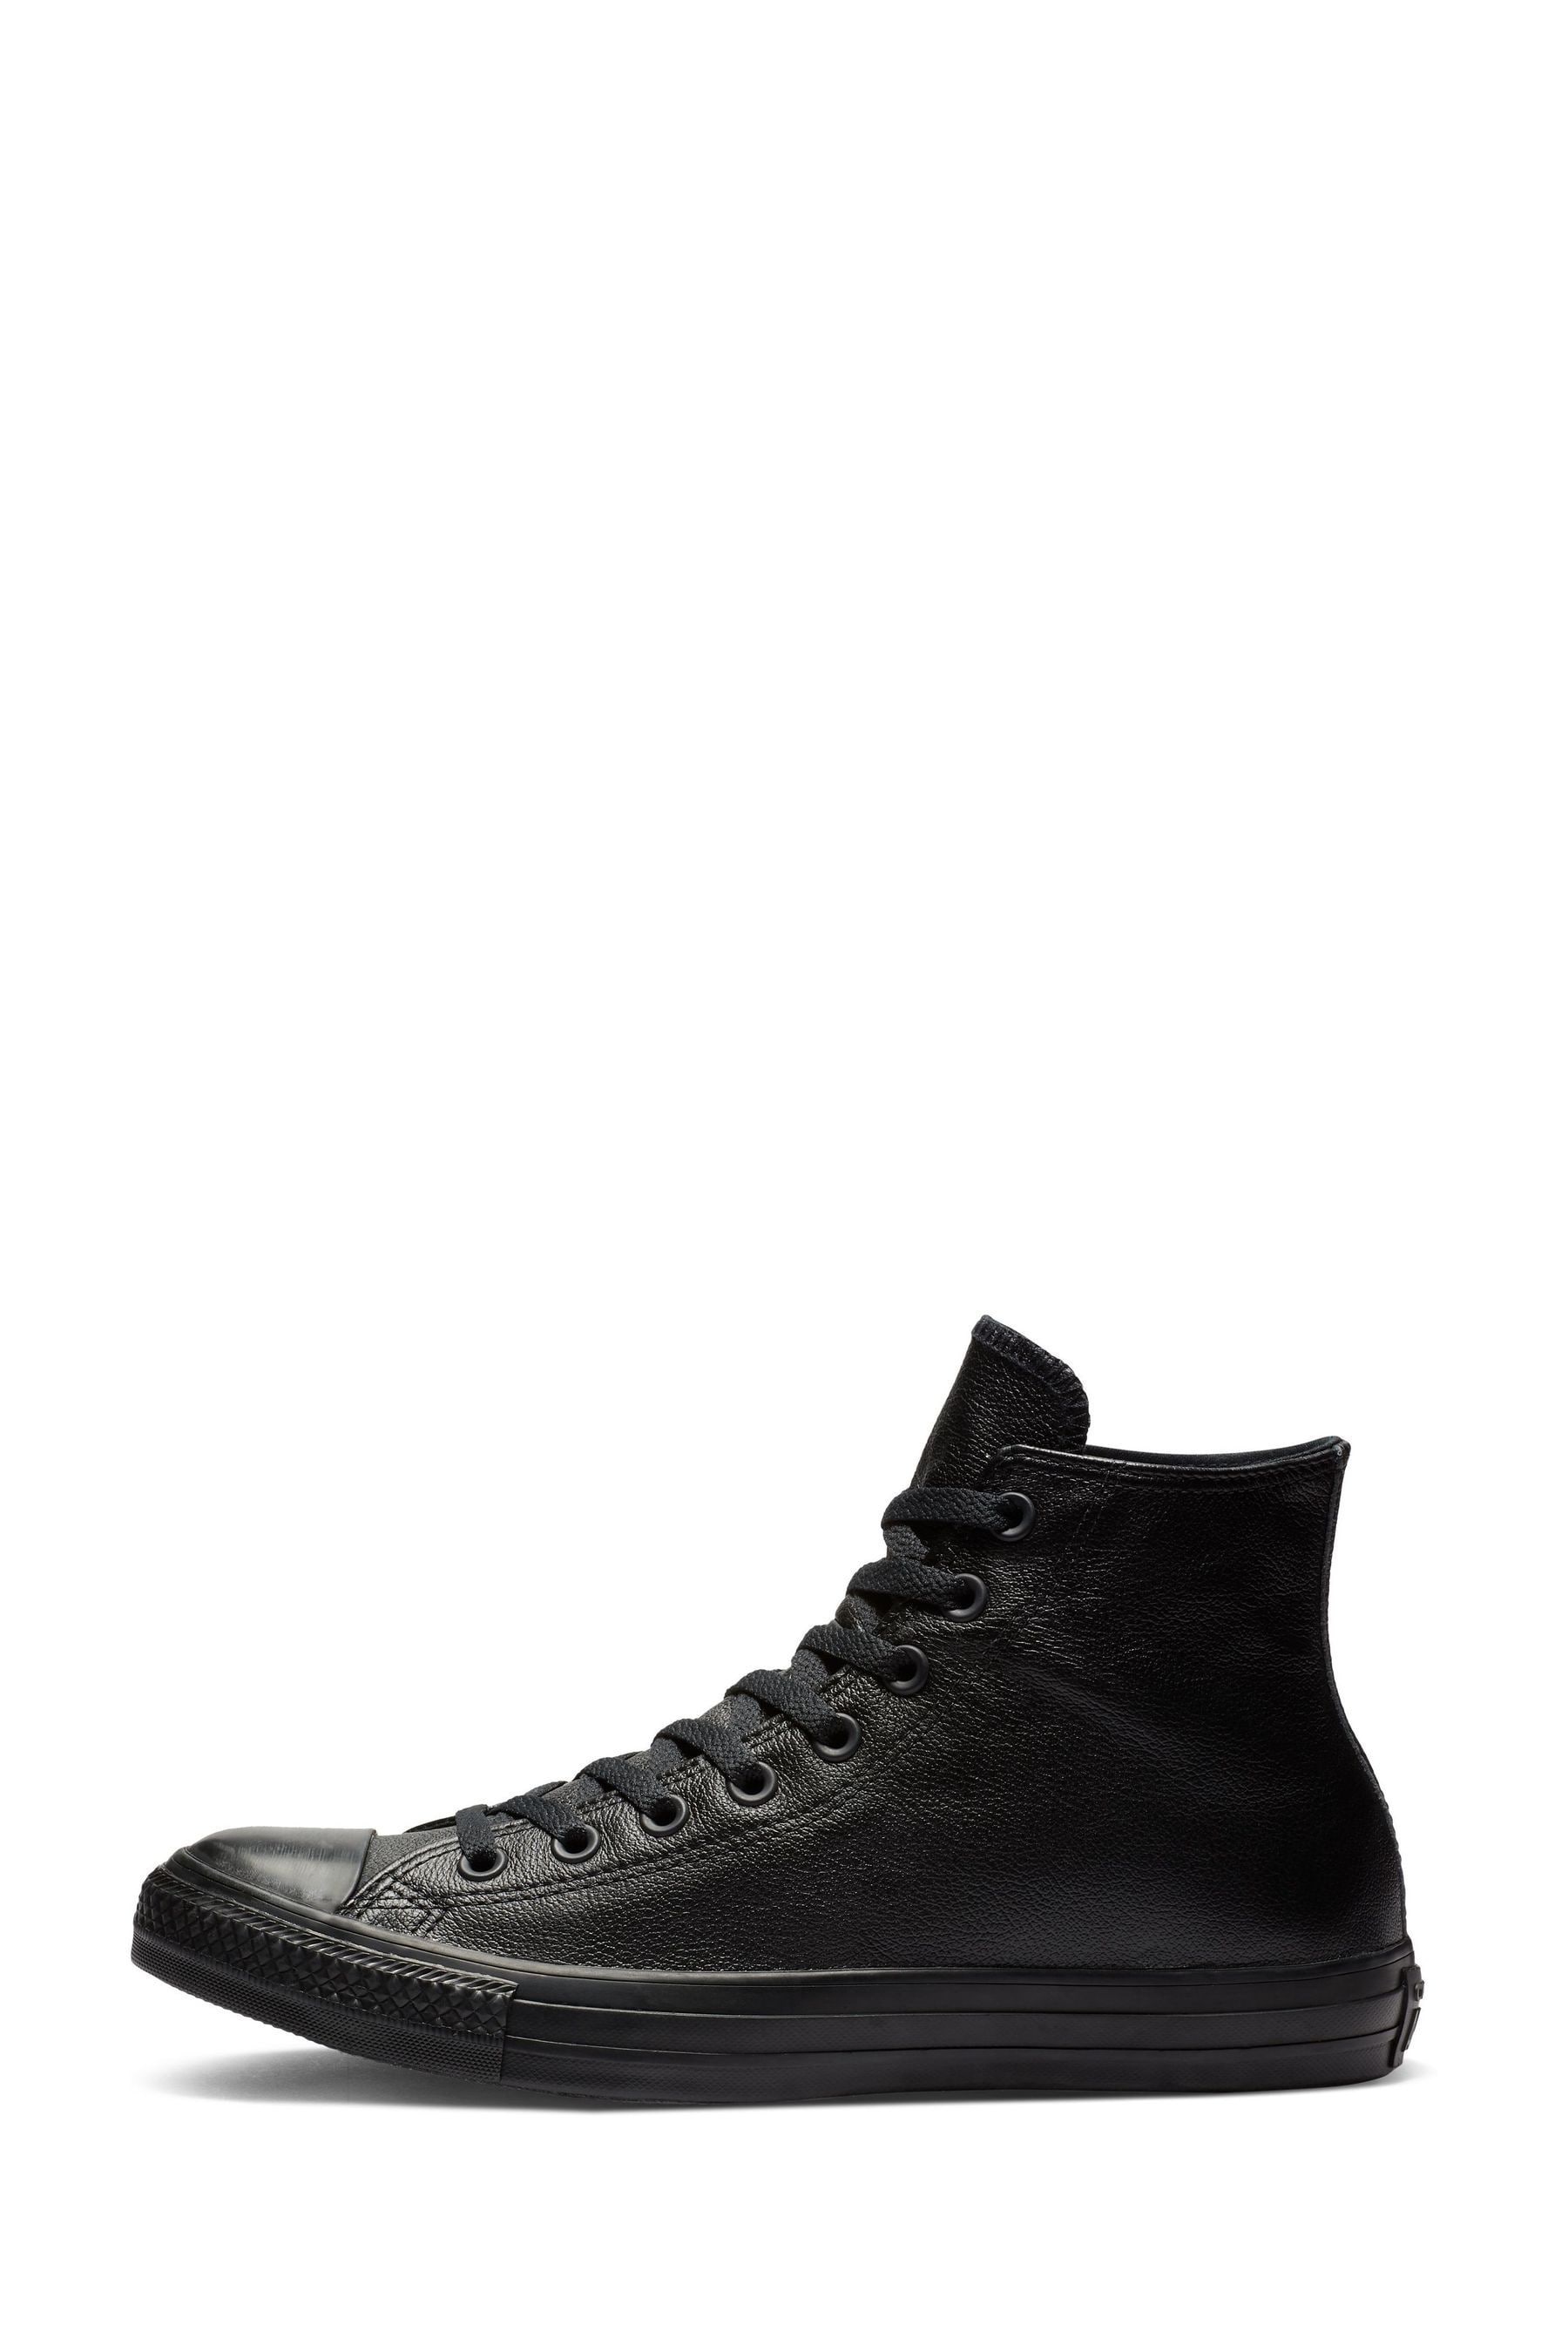 Buy Converse Black Leather High Top Trainers from the Next UK online shop